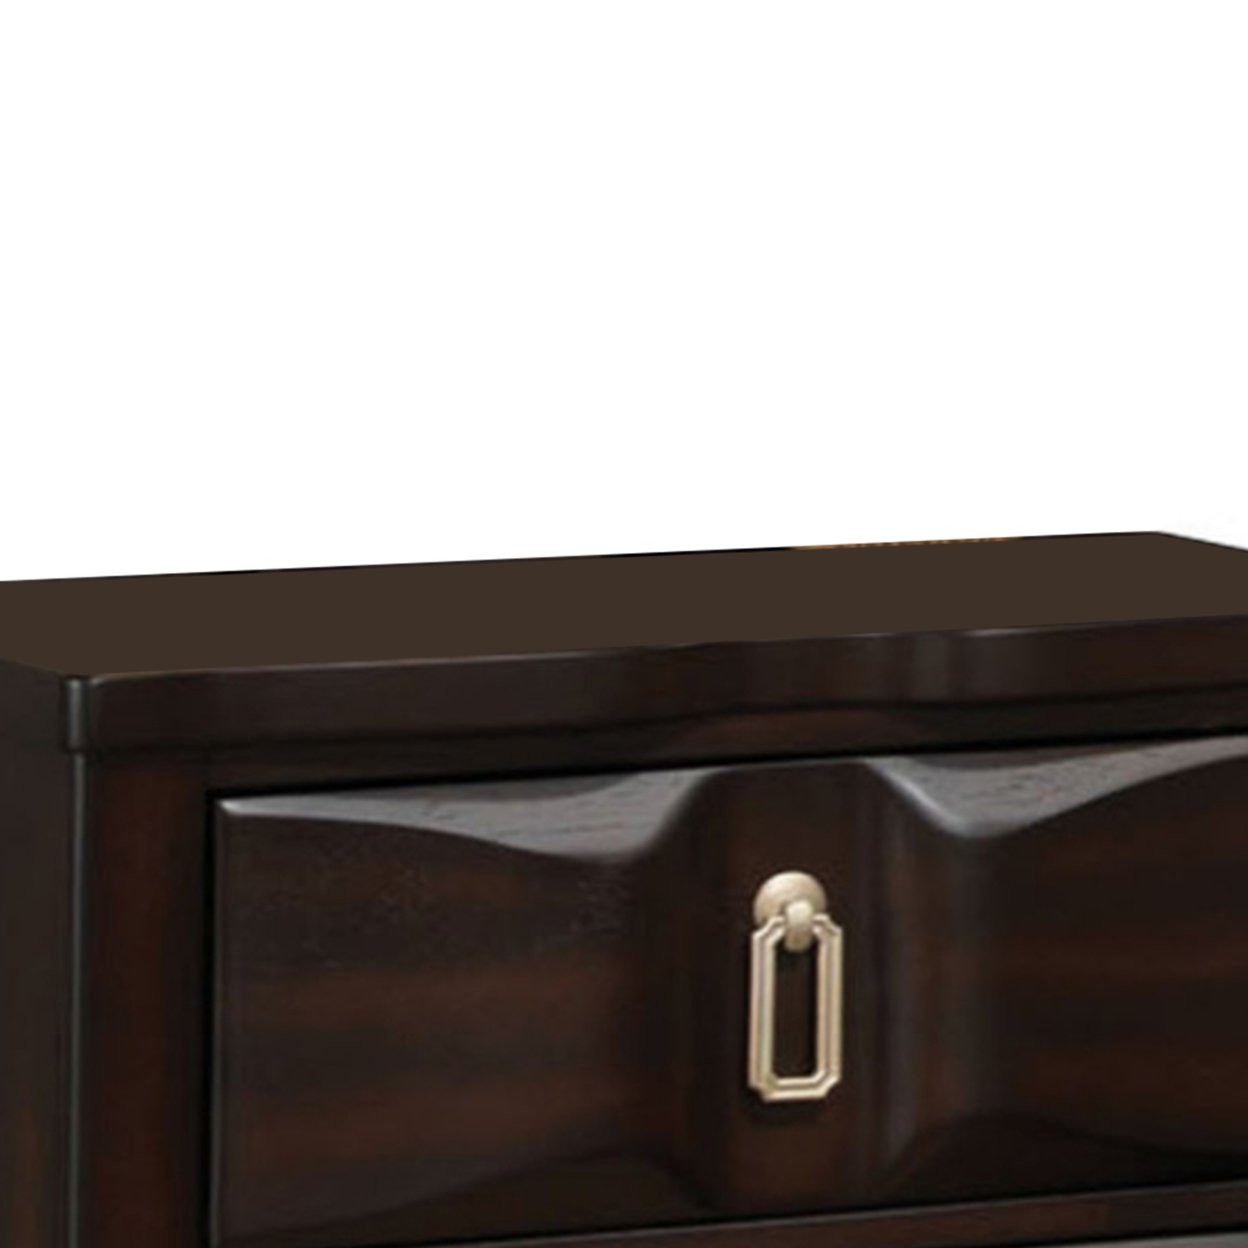 Transitional Style Wood Nightstand With 2 Drawers, Espresso Brown- Saltoro Sherpi